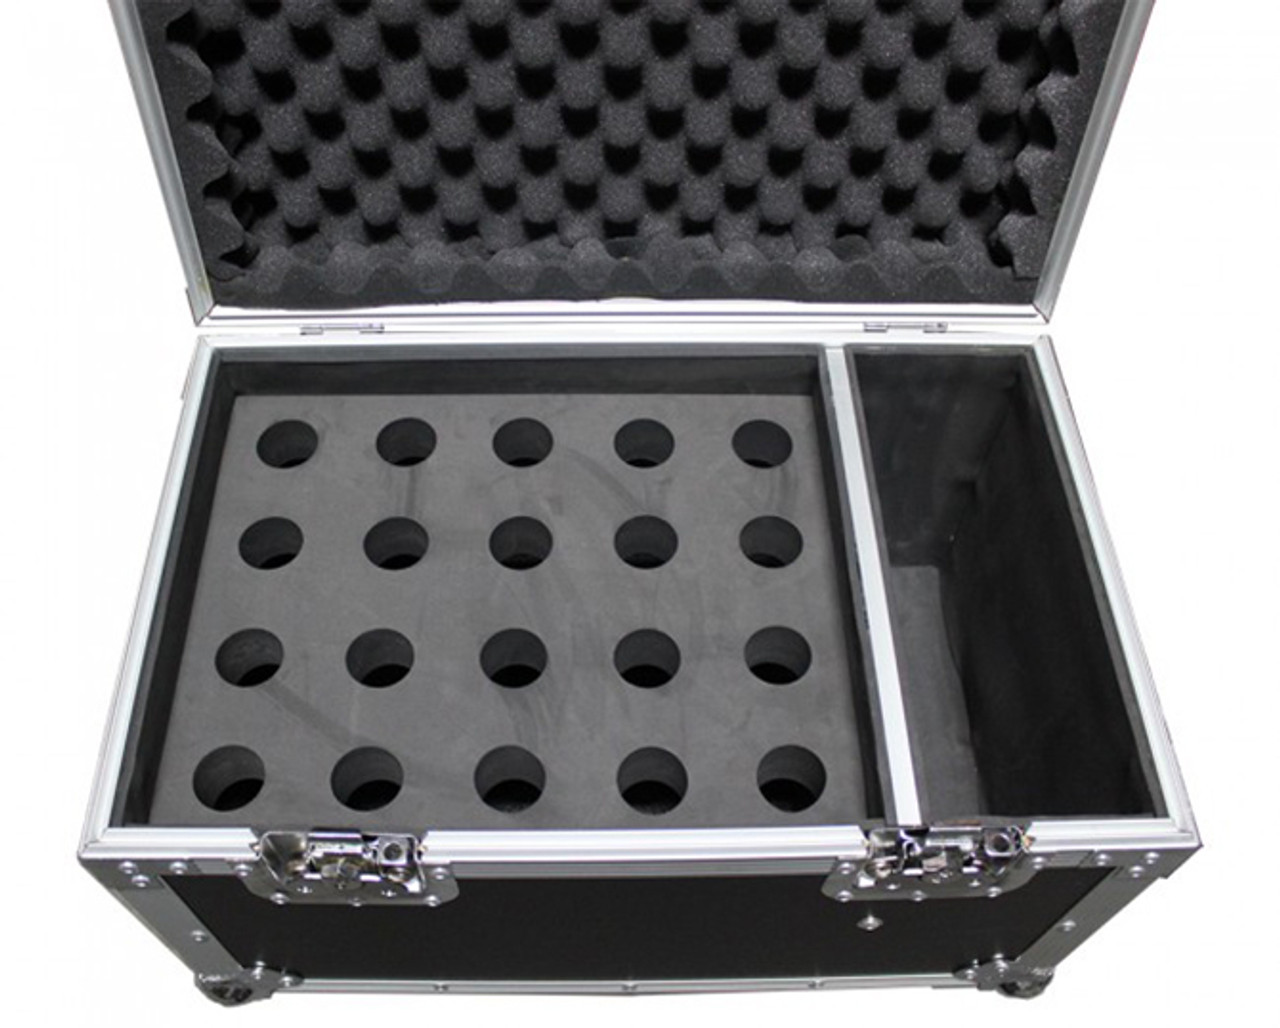 ProX XS-MIC20S ATA Flight Case for (20) Wireless Wired Microphones with  Additional Storage